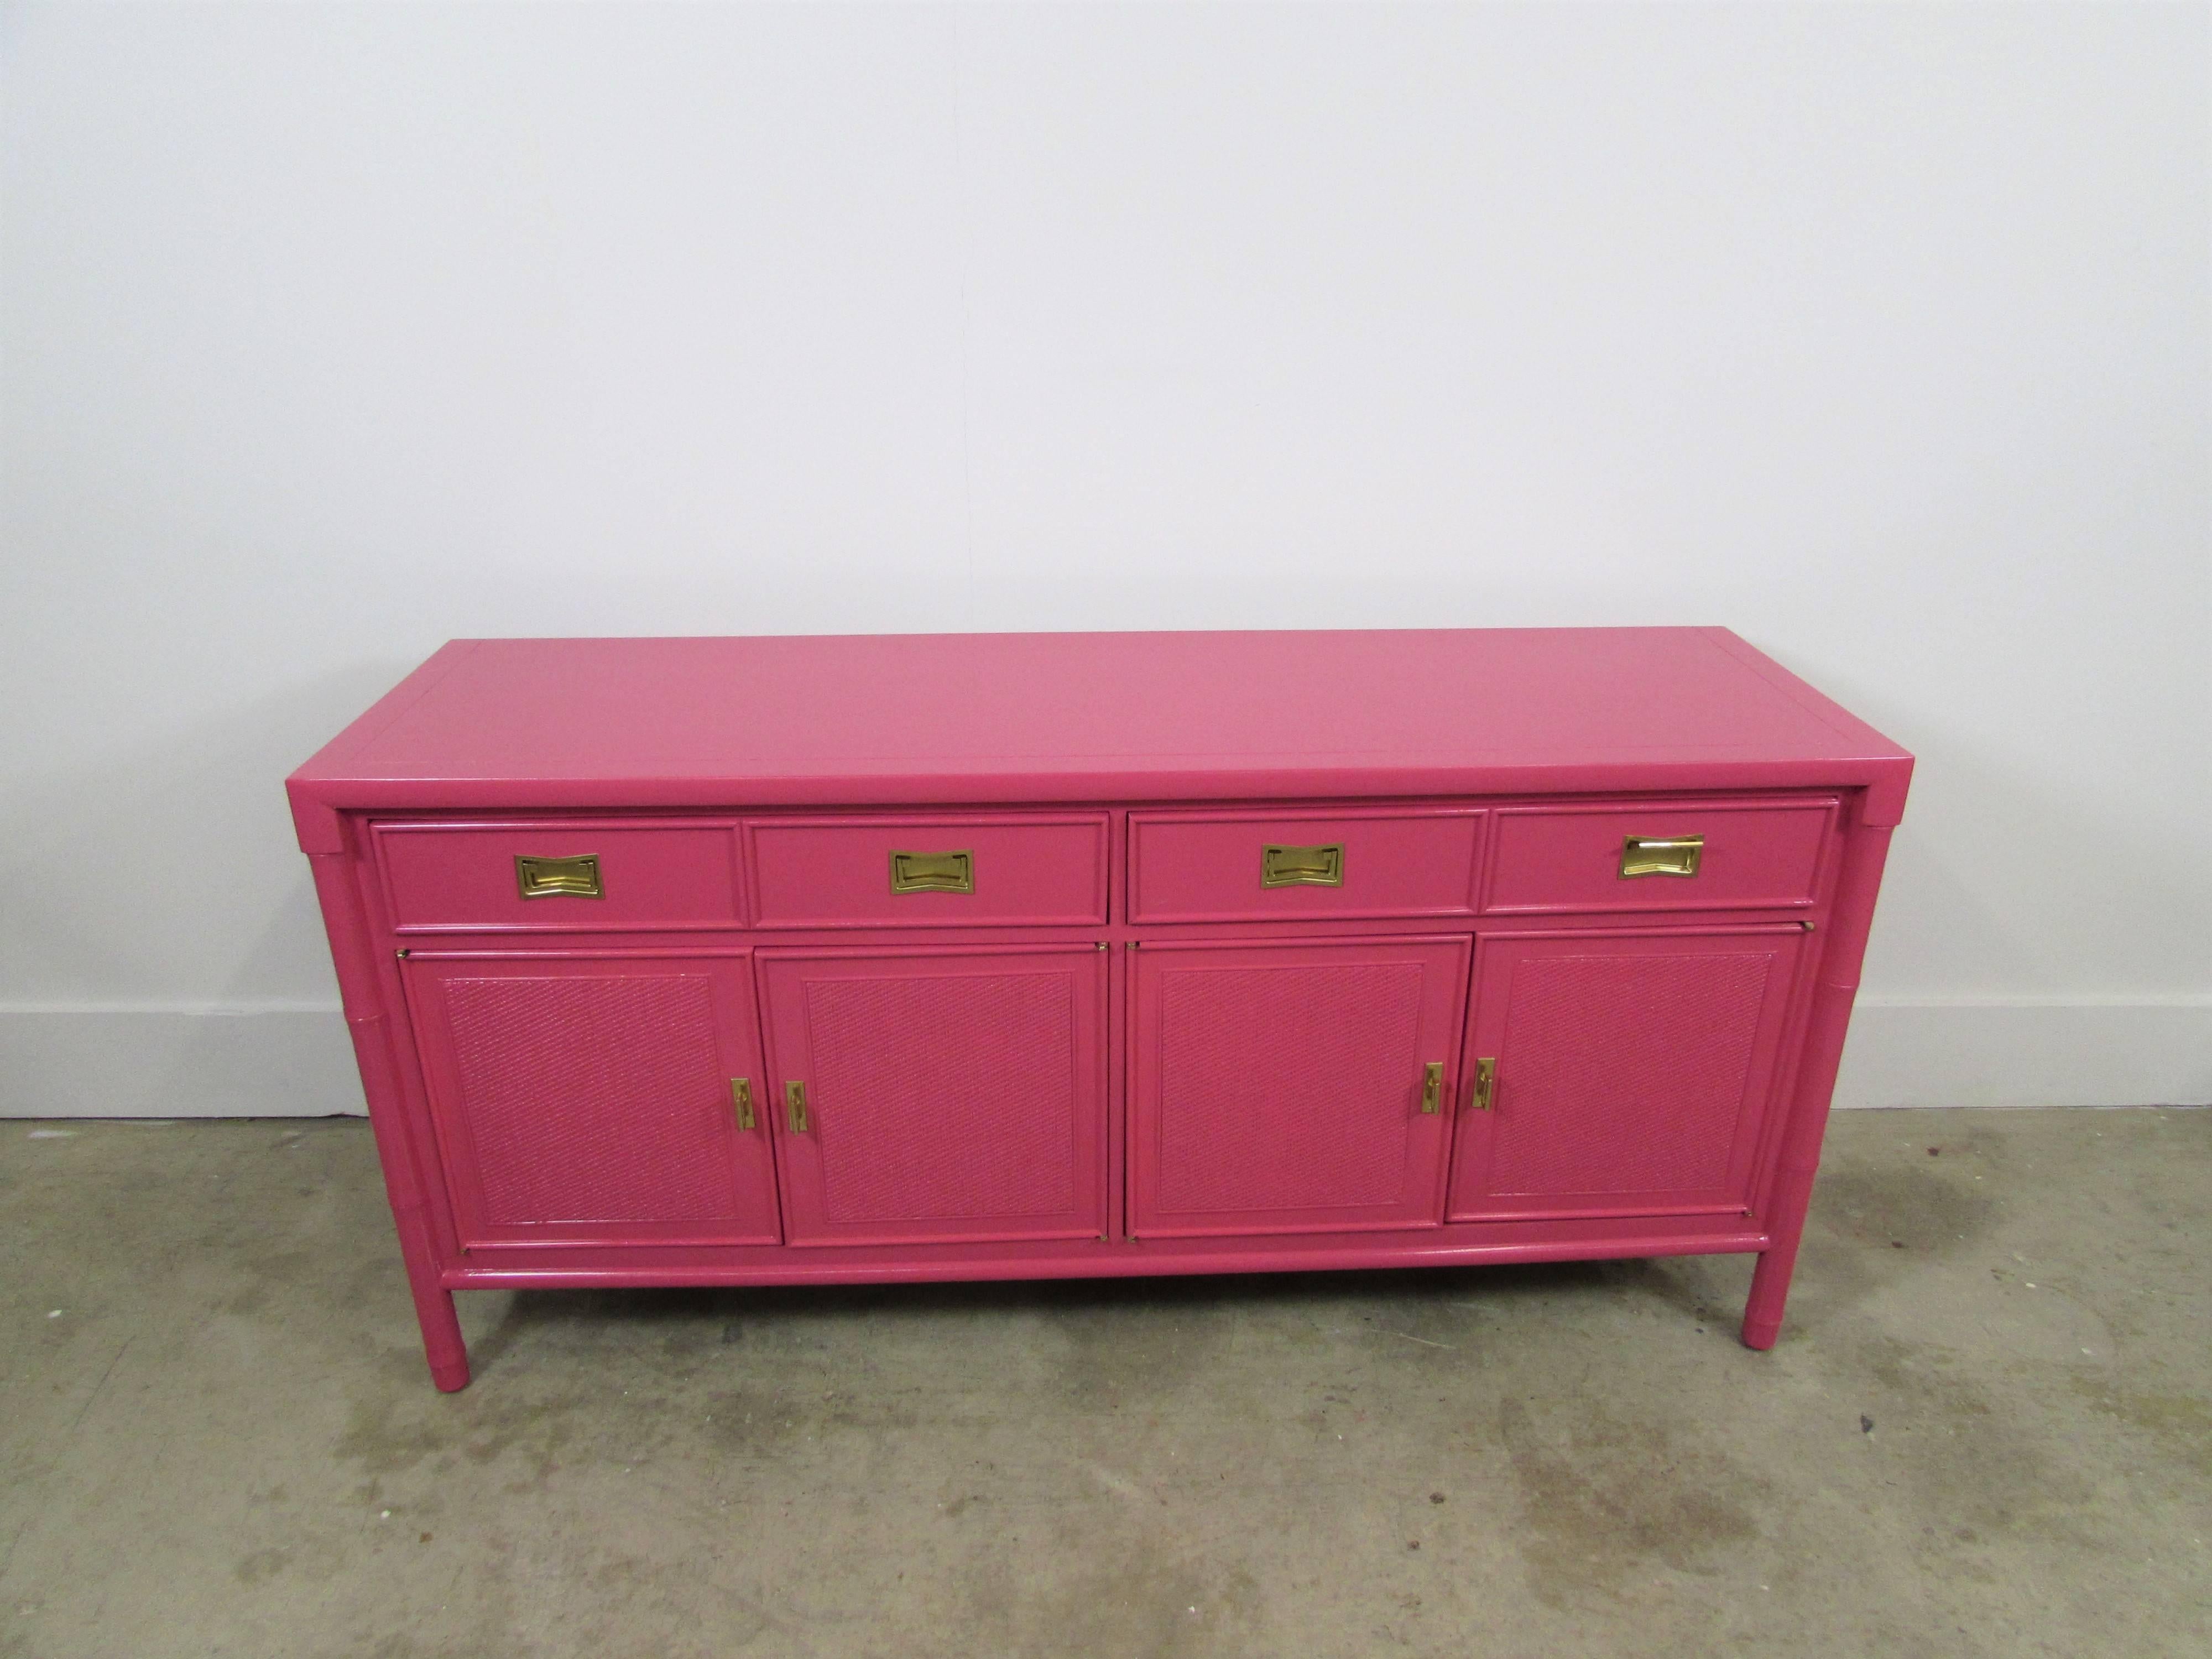 Century faux bamboo and cane Credenza Lacquered In-house in Benjamin Moore Peony Pink gloss finish with two upper drawers under four swinging doors and brass recessed hardware under our custom gold. Interior drawers and cabinets are lined in